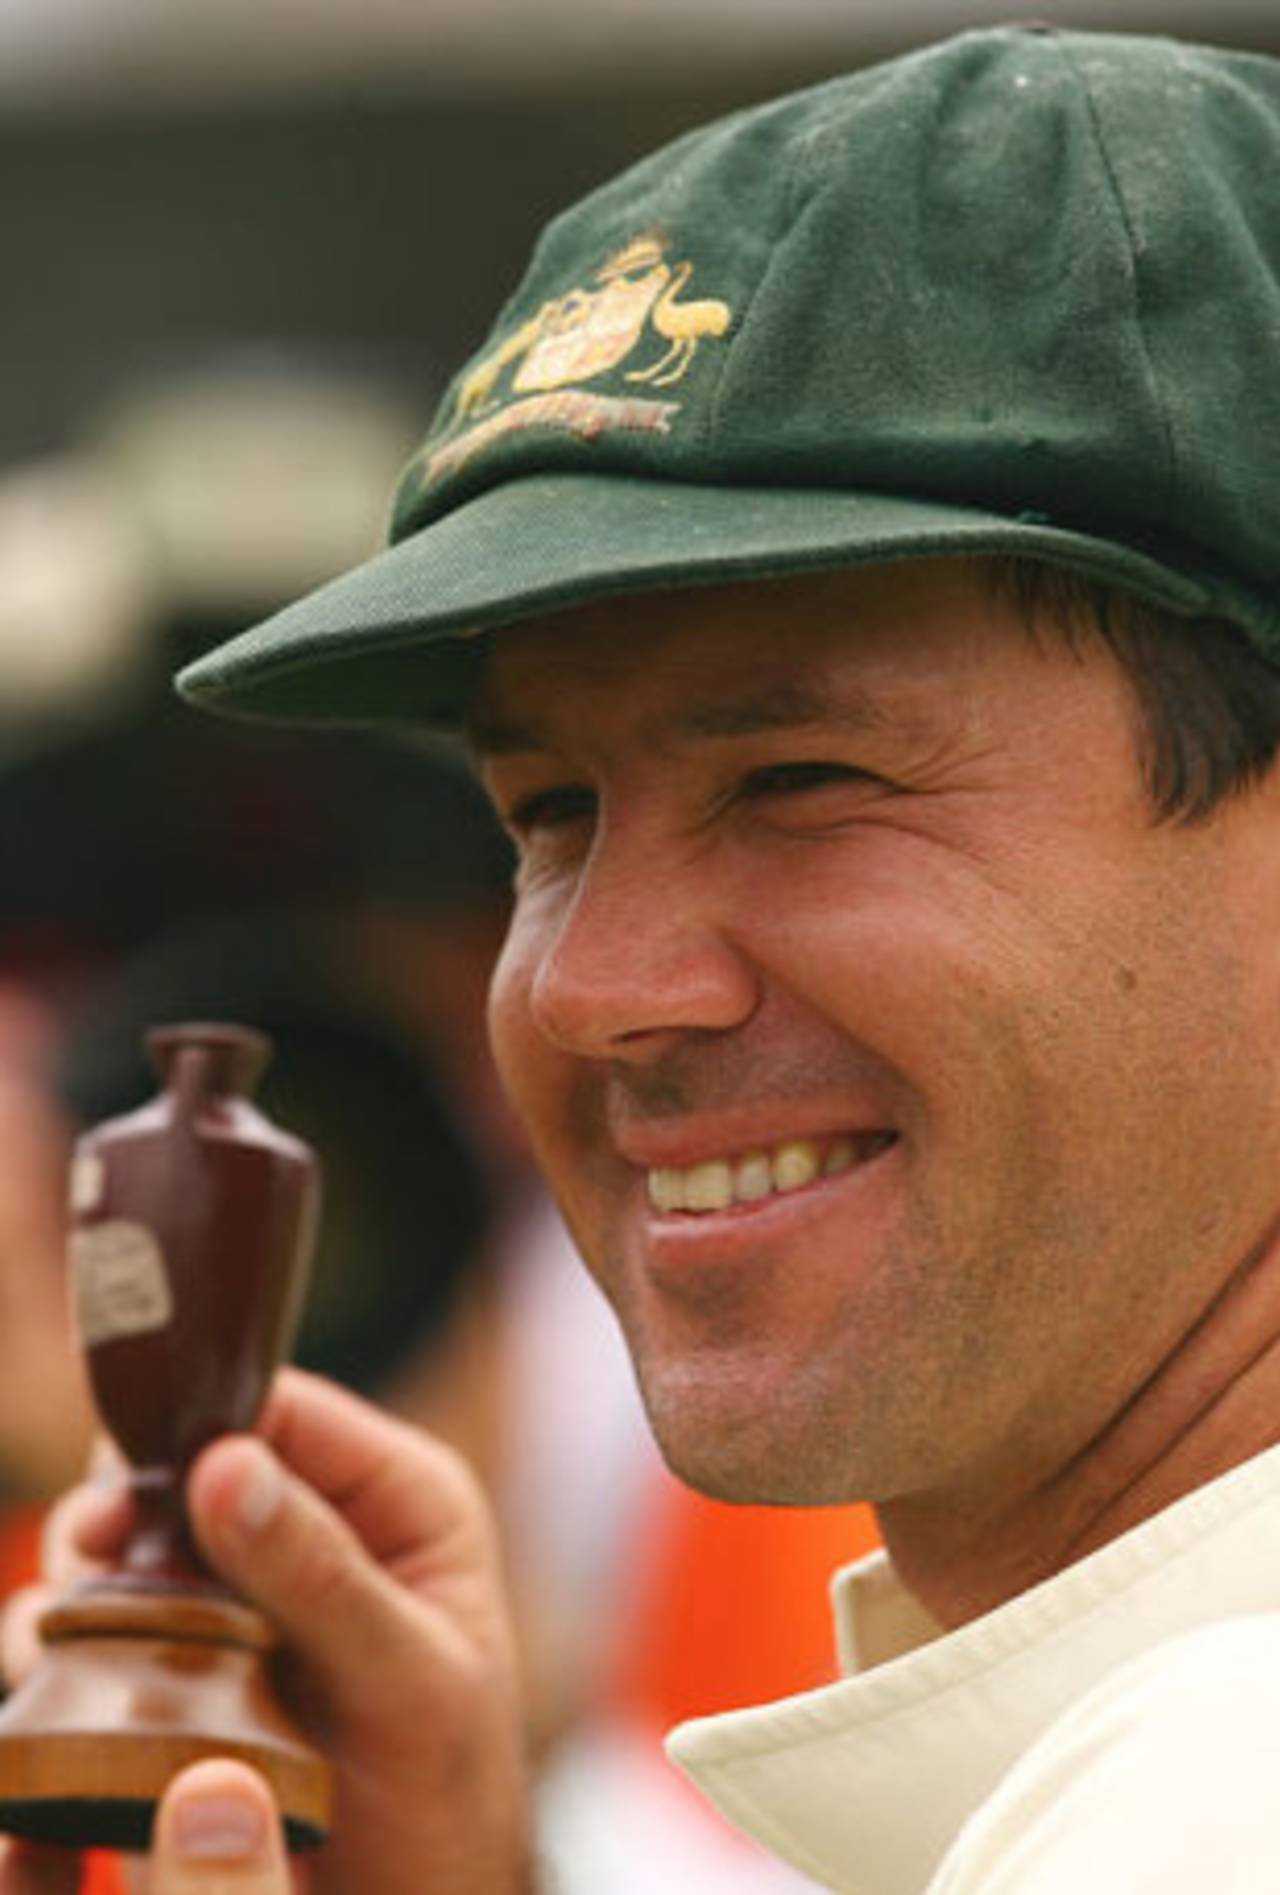 A beaming Ricky Ponting holds the Ashes urn, Australia v England, 3rd Test, Perth, December 18, 2006